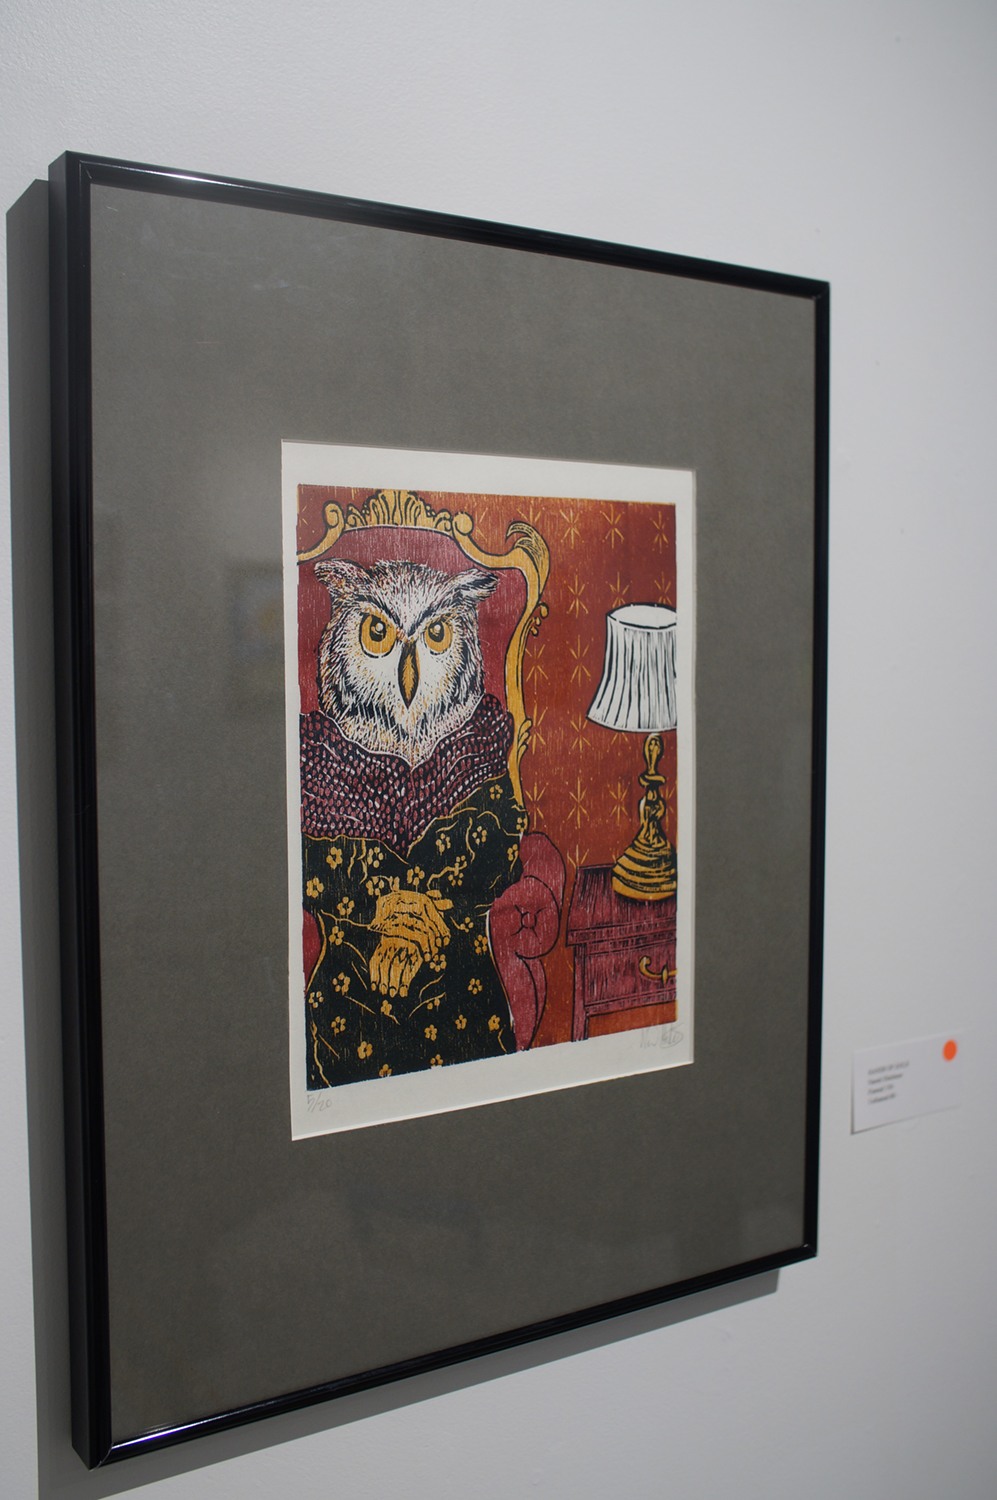 A print of an owl hangs on the wall at Naomi Hutchquist's BFA thesis exhibition at Well Sreet Art Gallery in 2019. Image courtesy of Naomi Hutchquist.